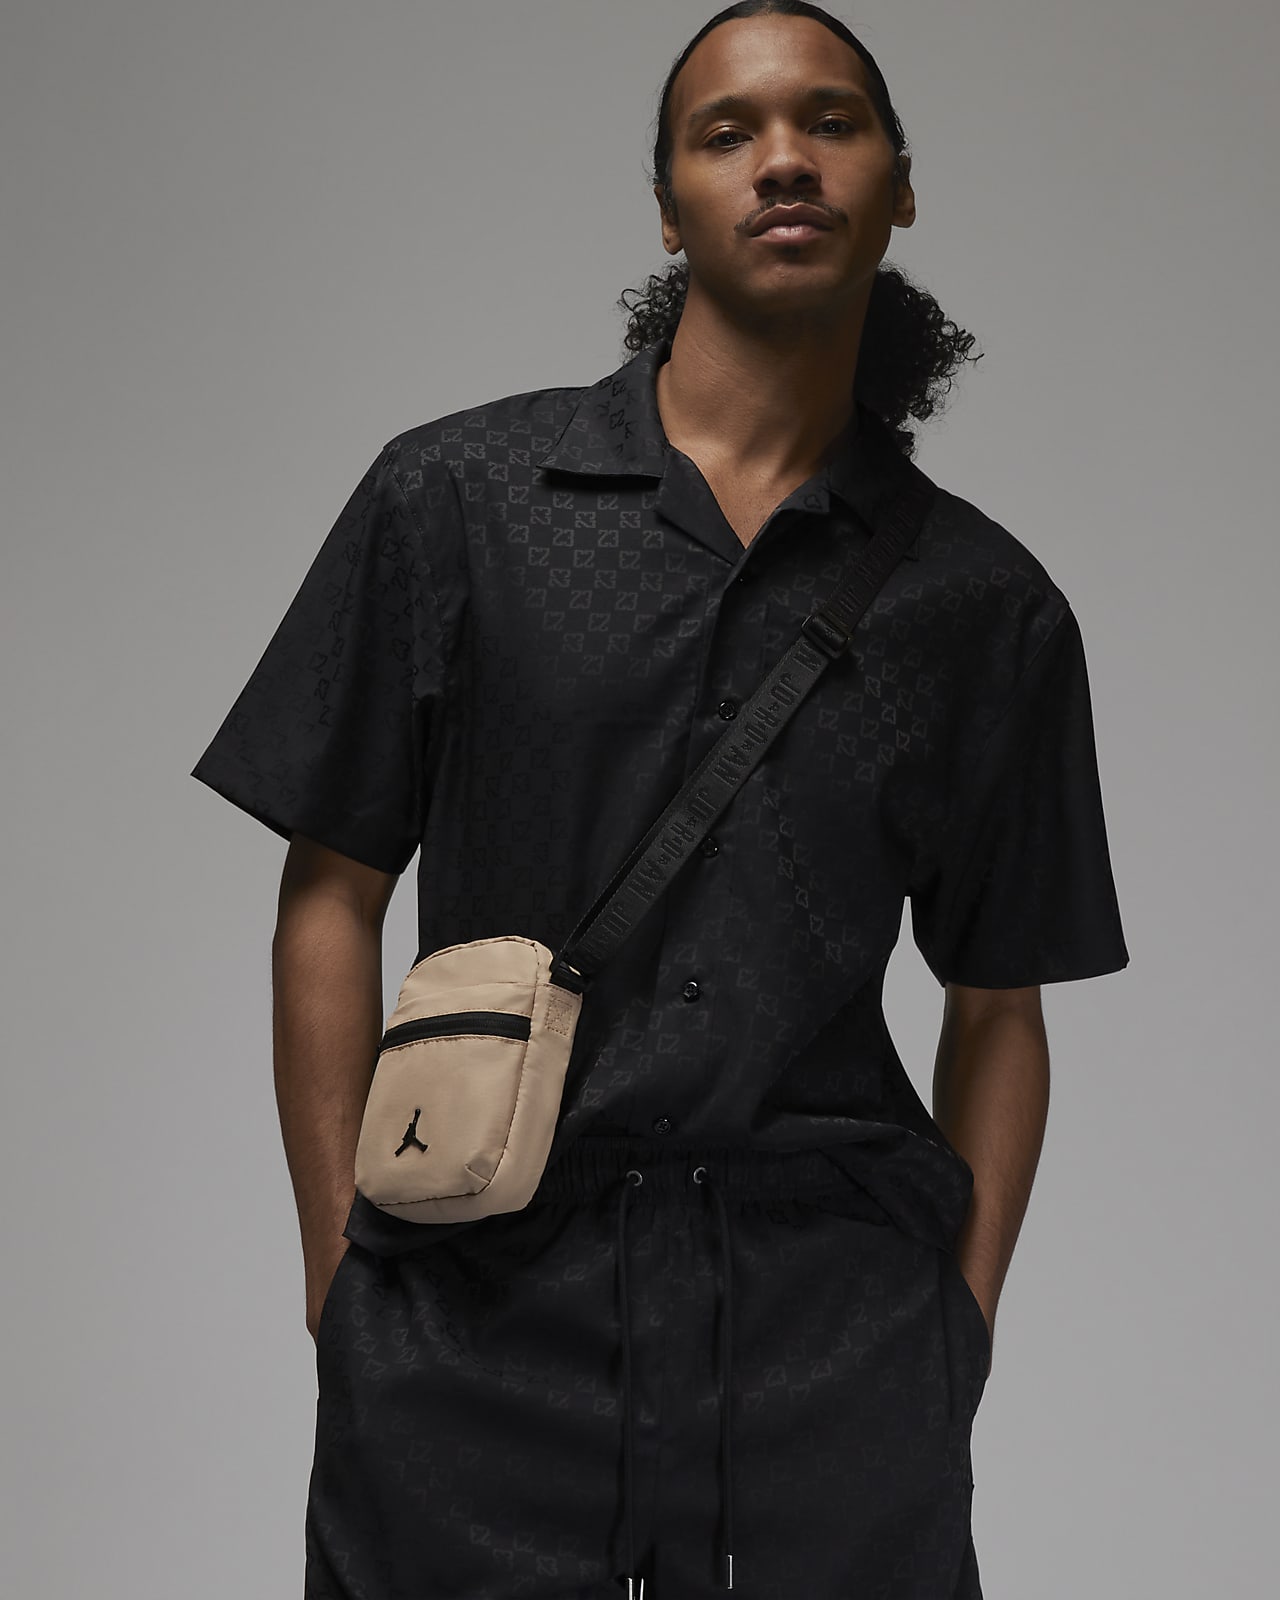 Why are sling bags for men becoming popular?